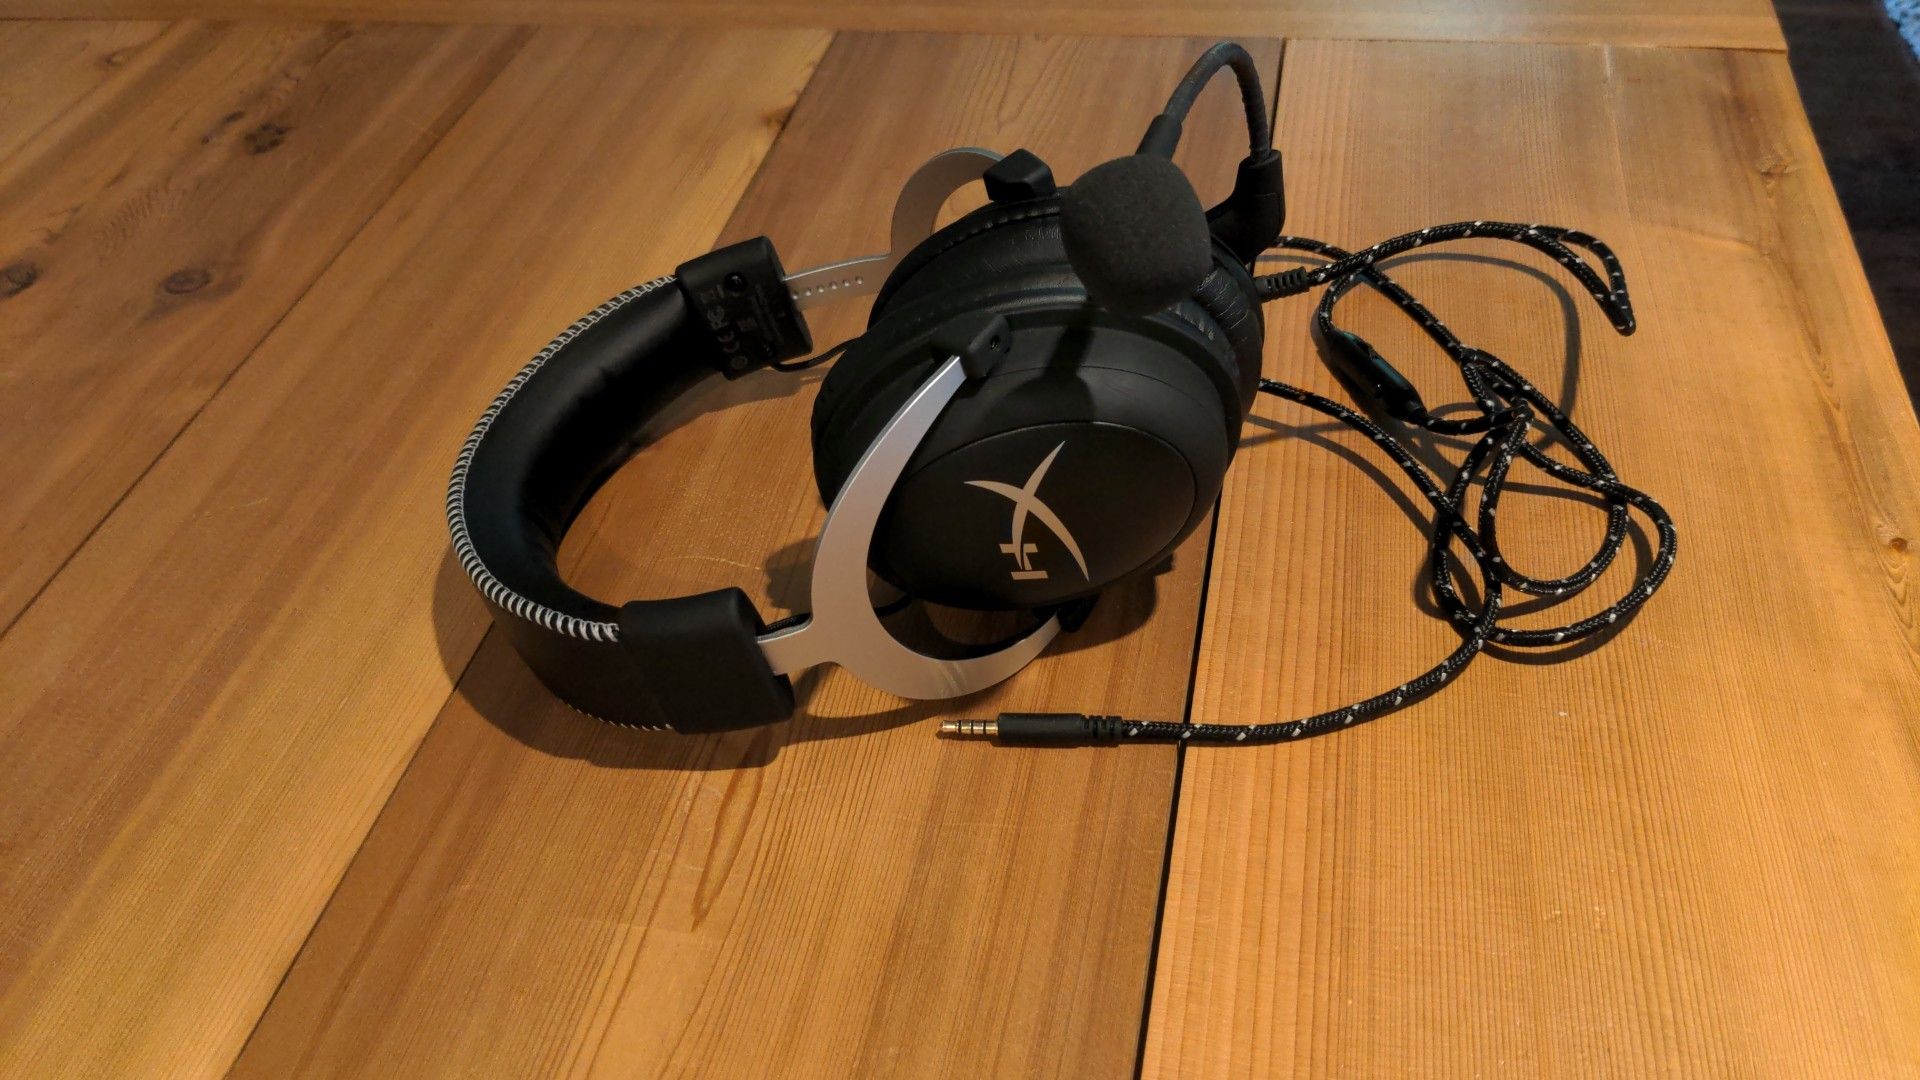 HyperX Cloud Pro Gaming Headset - Very Good Condition